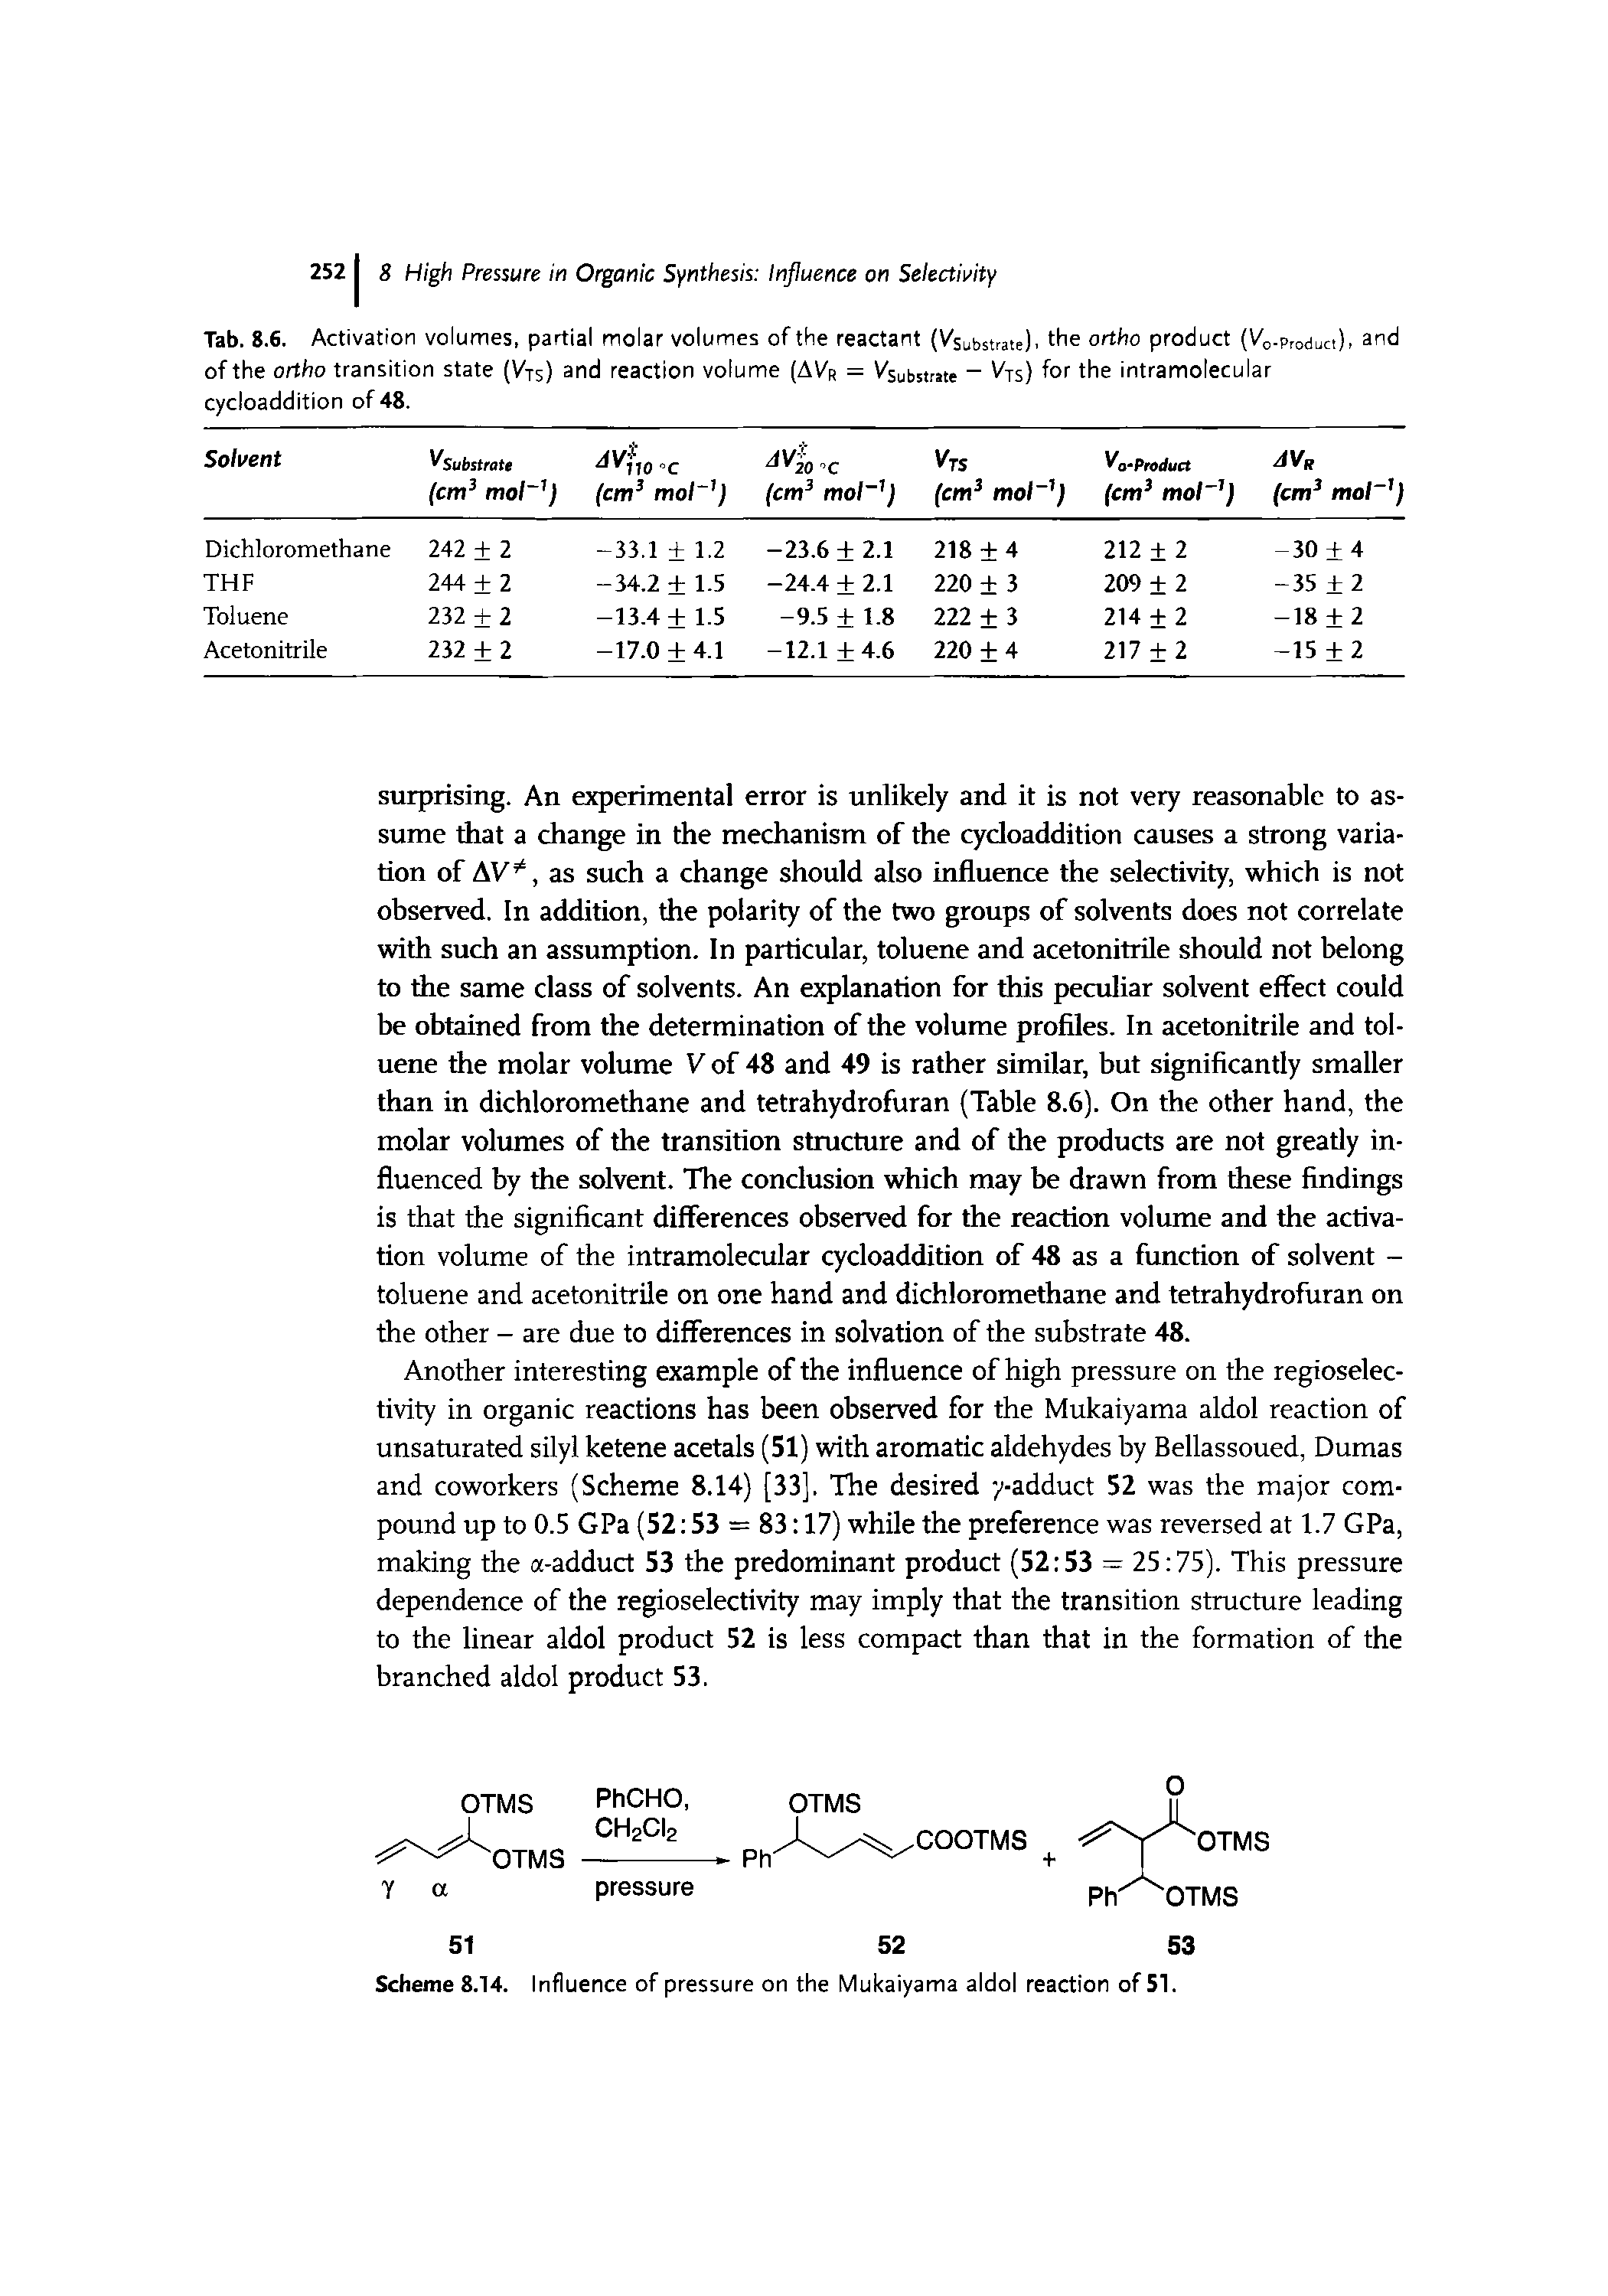 Tab. 8.6. Activation volumes, partial molar volumes of the reactant (Vsubstrate). the ortho product (Vo-Produci), and of the ortho transition state (Vts) and reaction volume (AVr = V substrate Ws) for the intramolecular cycloaddition of 48.